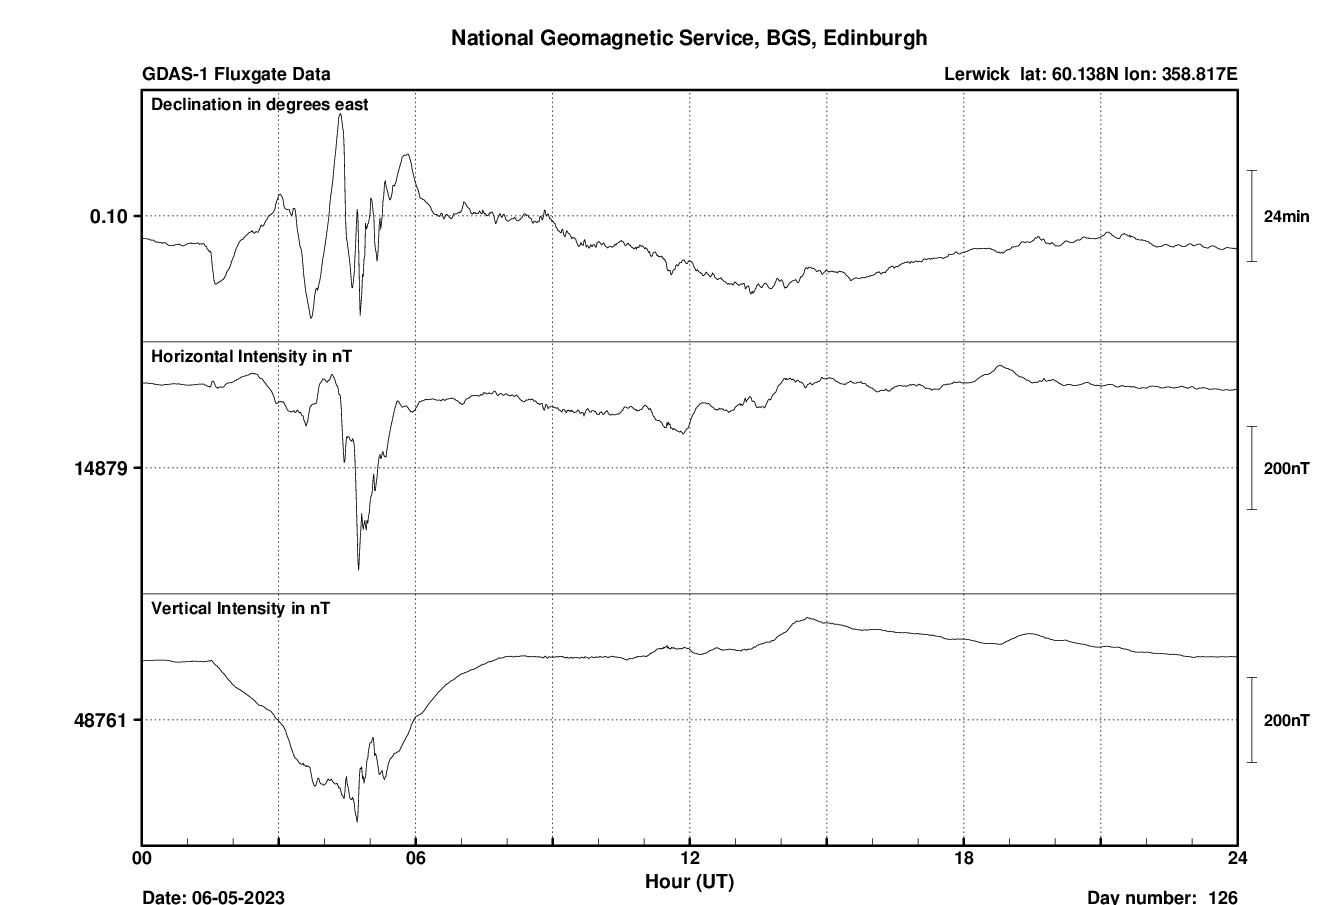 Lerwick Observatory Magnetometer data on the 6<sup>th May 